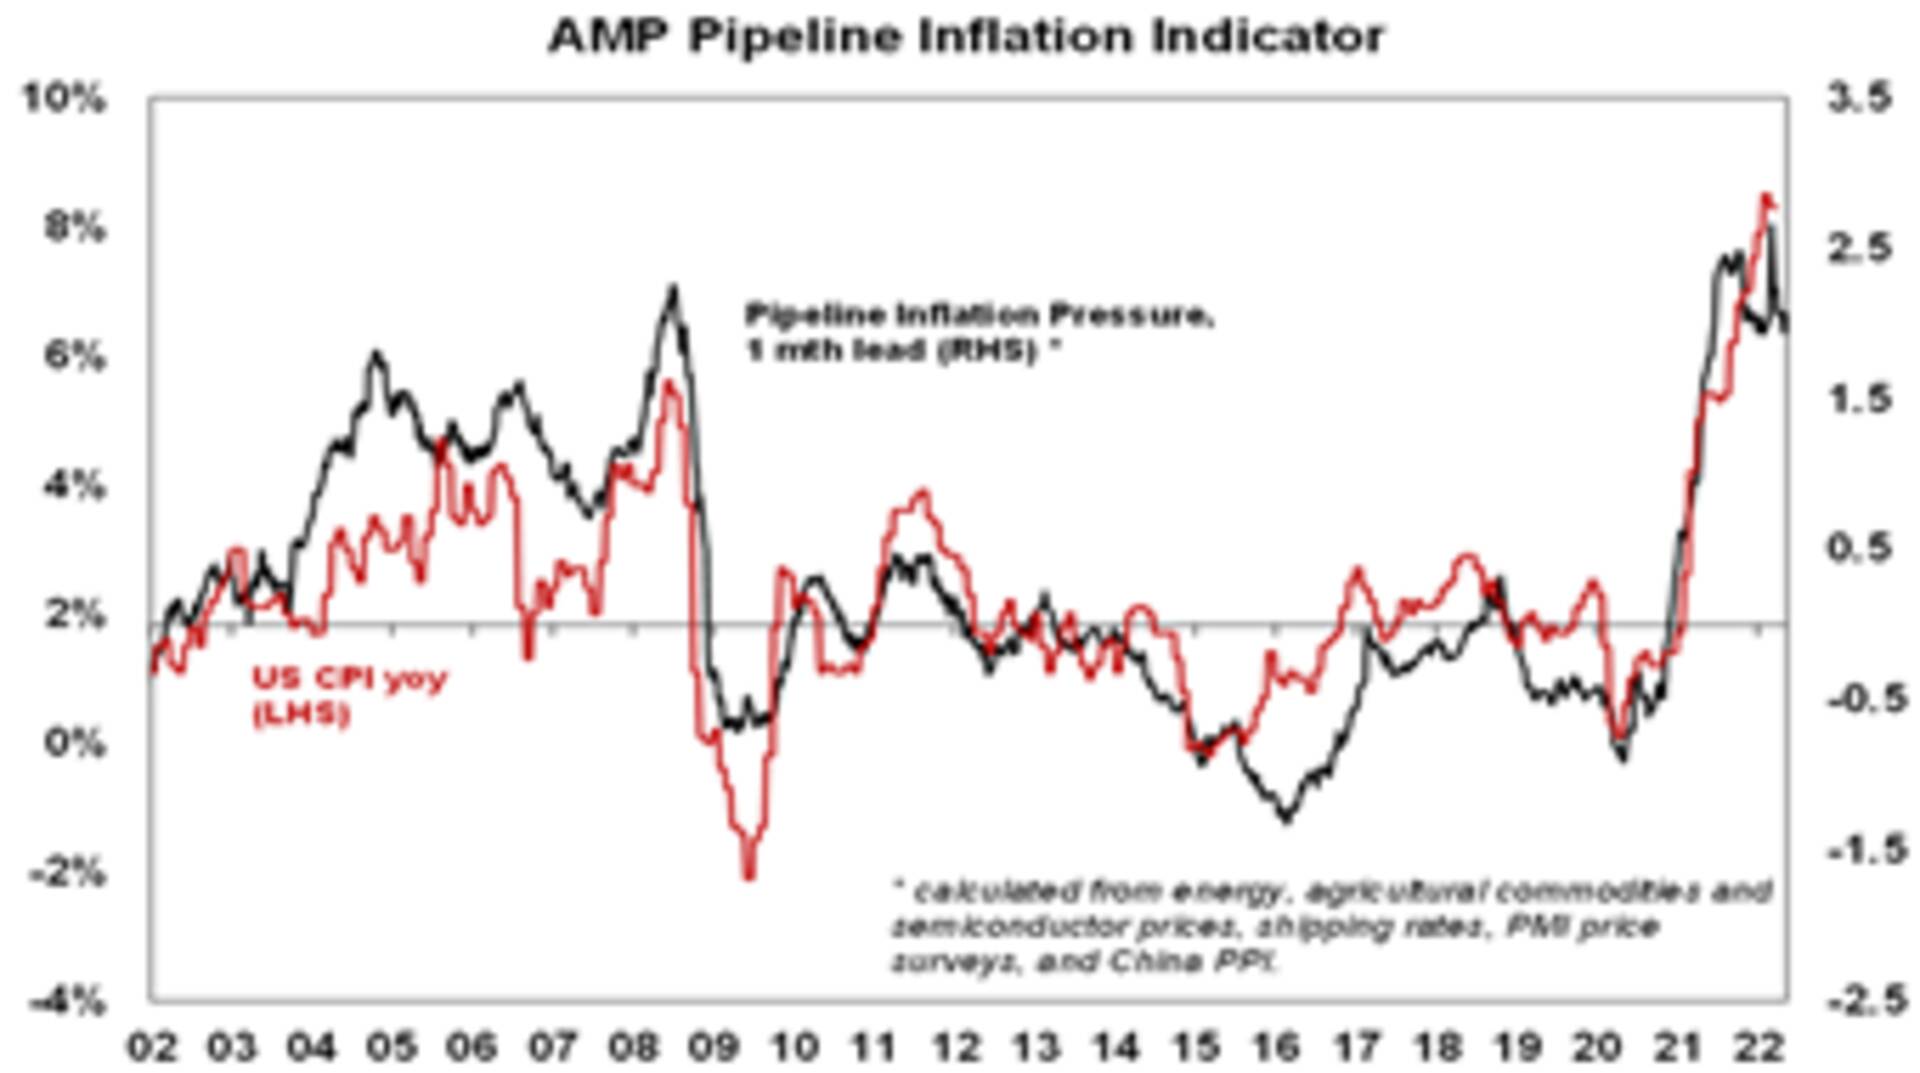 The Inflation Pipeline Indicator is based on commodity prices, shipping rates and PMI price components. Source: Macrobond, AMP